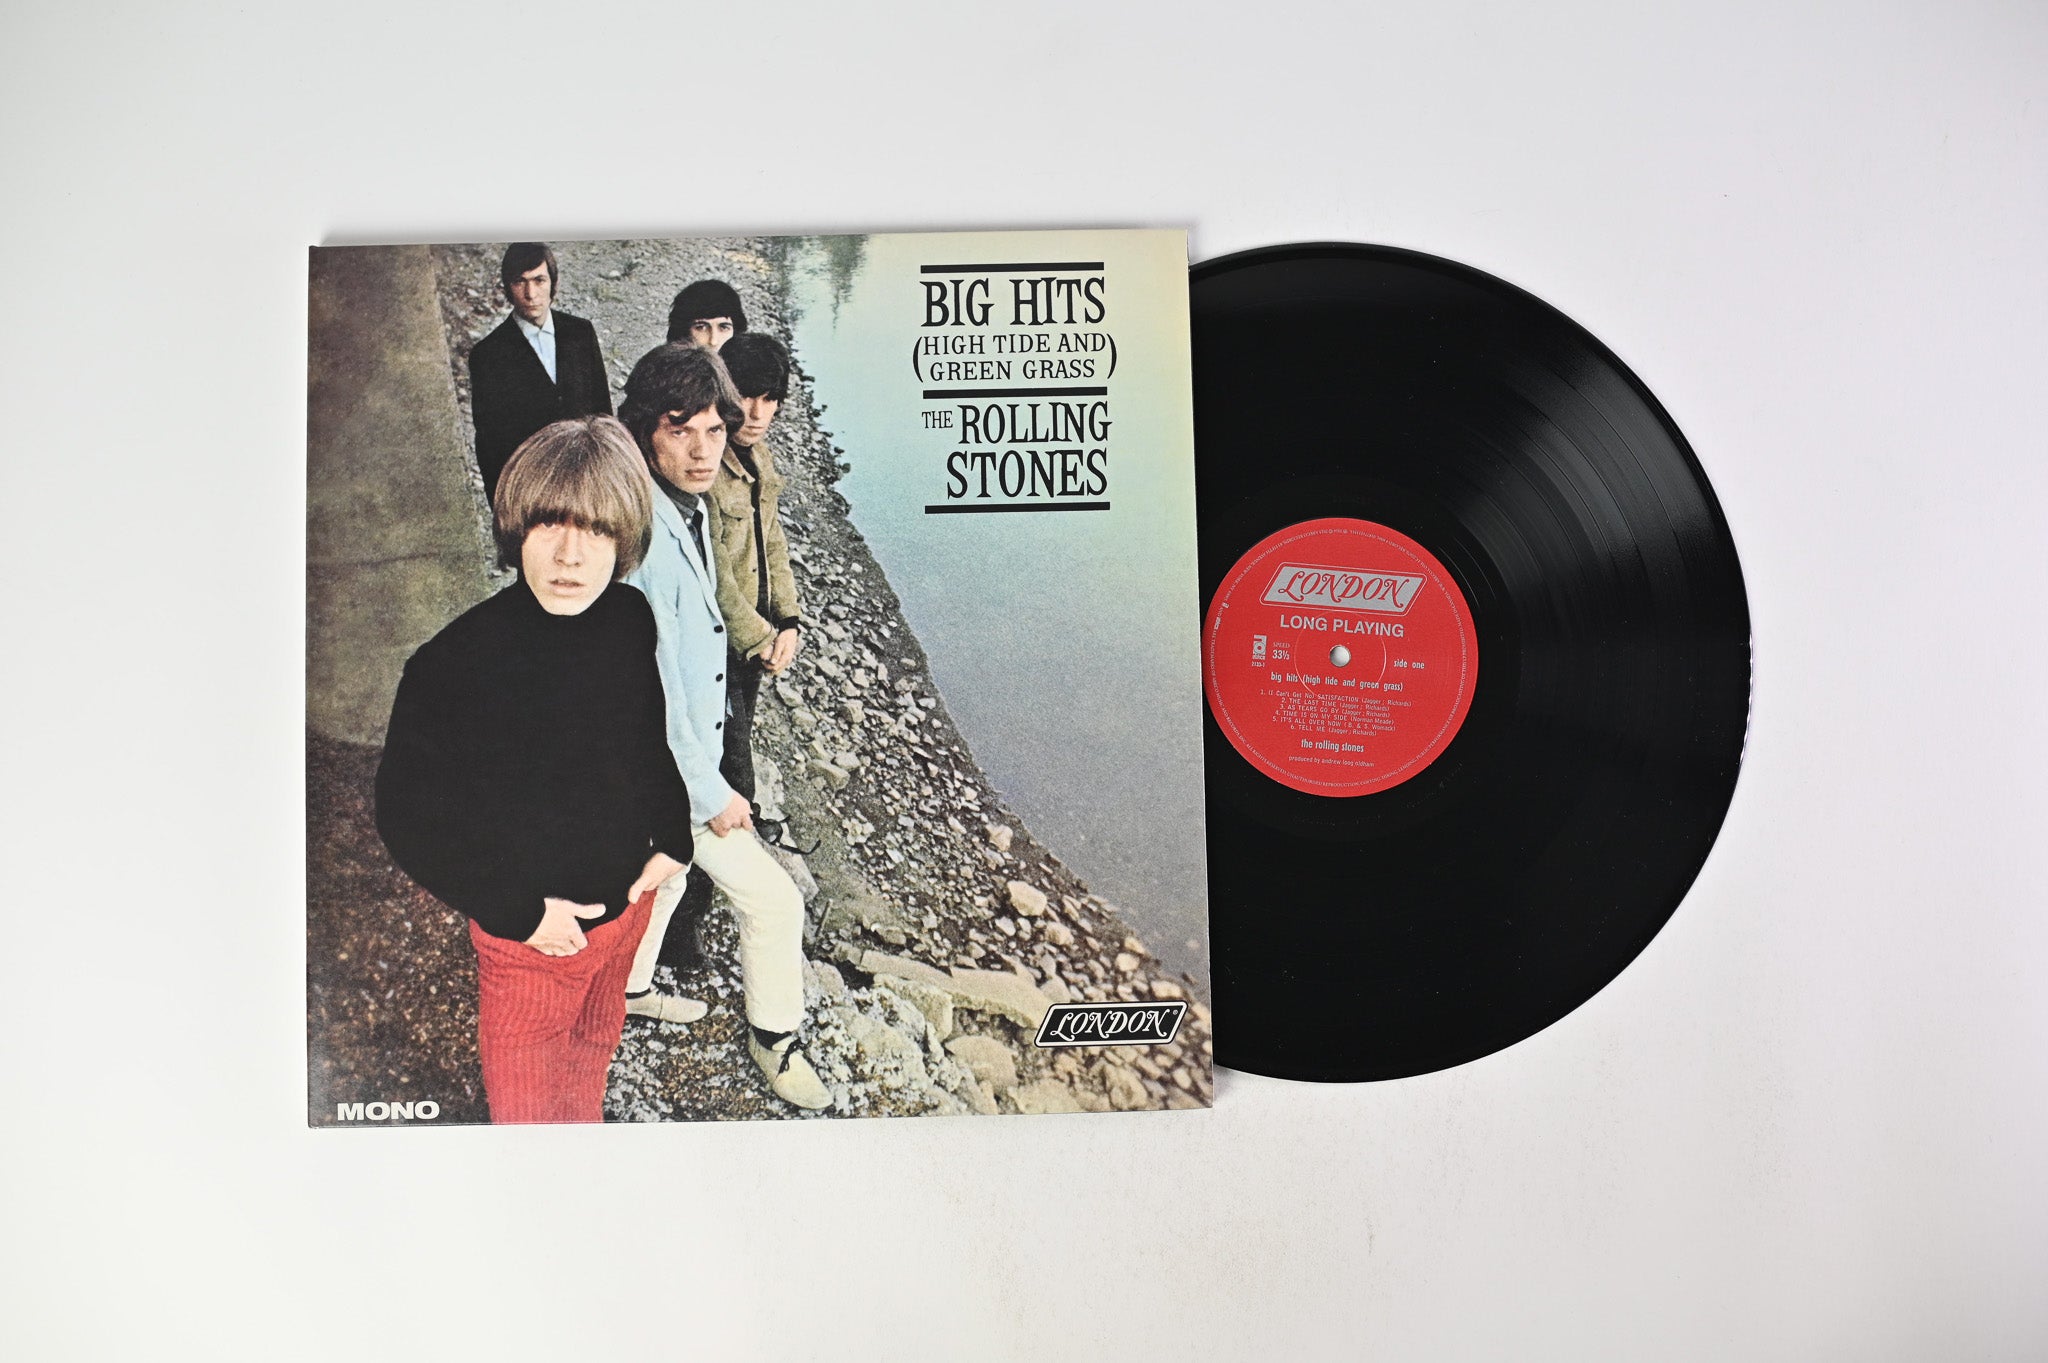 The Rolling Stones - Big Hits (High Tide And Green Grass) Reissue on ABKCO/London Records